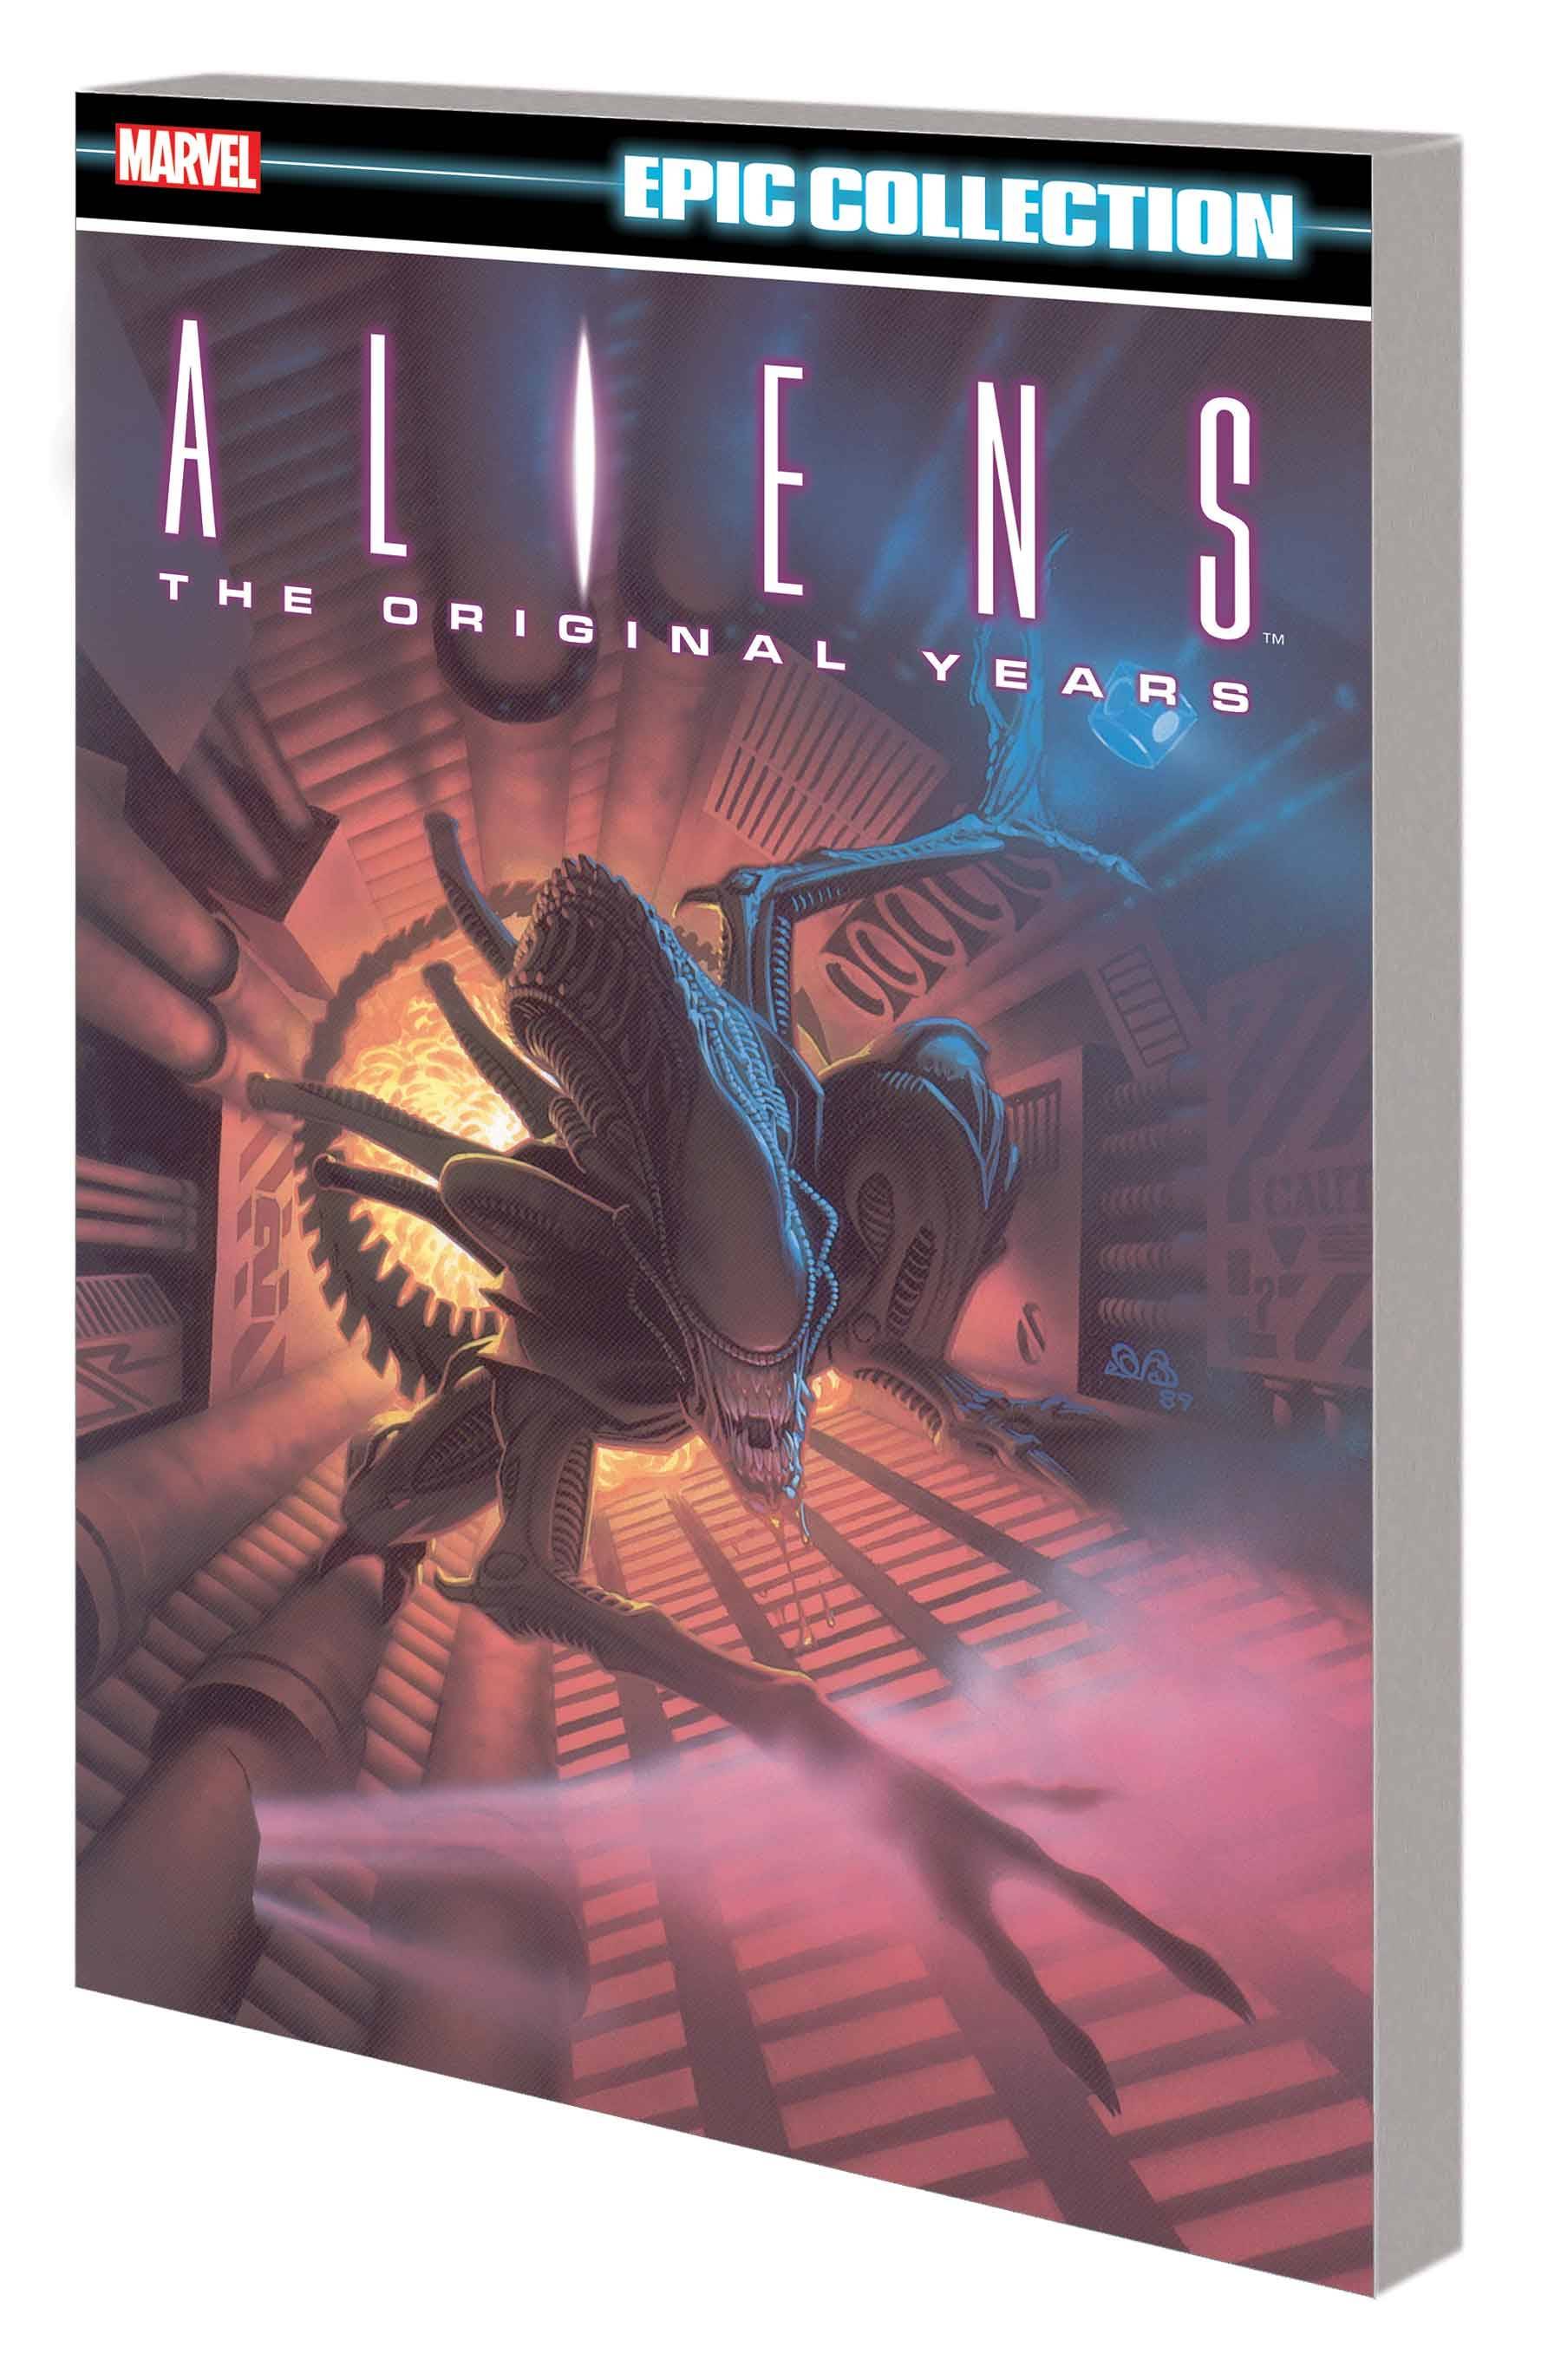 Aliens: Epic Collection - The Original Years vol 1 s/c